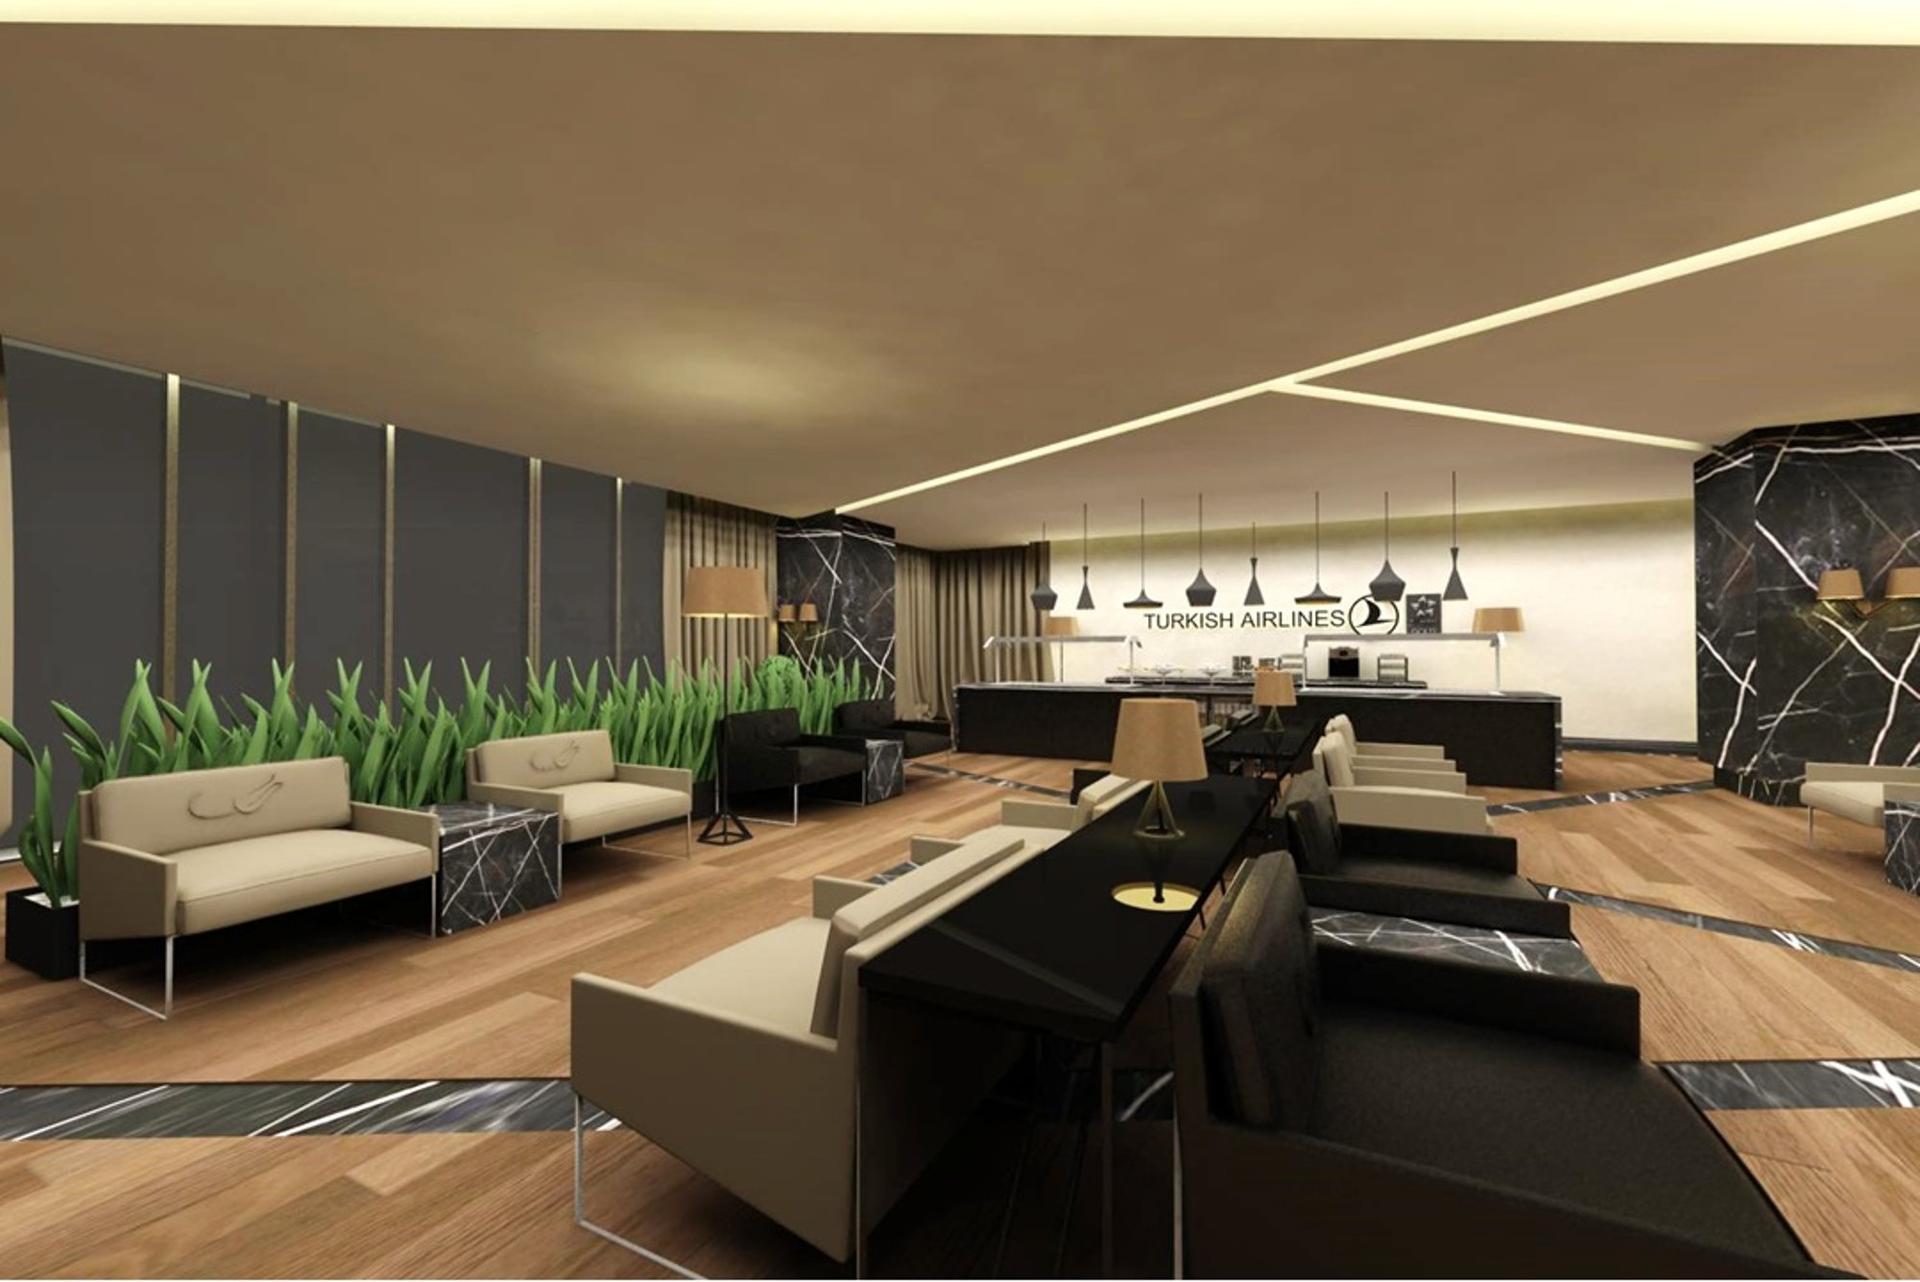 Turkish Airlines CIP Lounge (Business Lounge) image 15 of 27